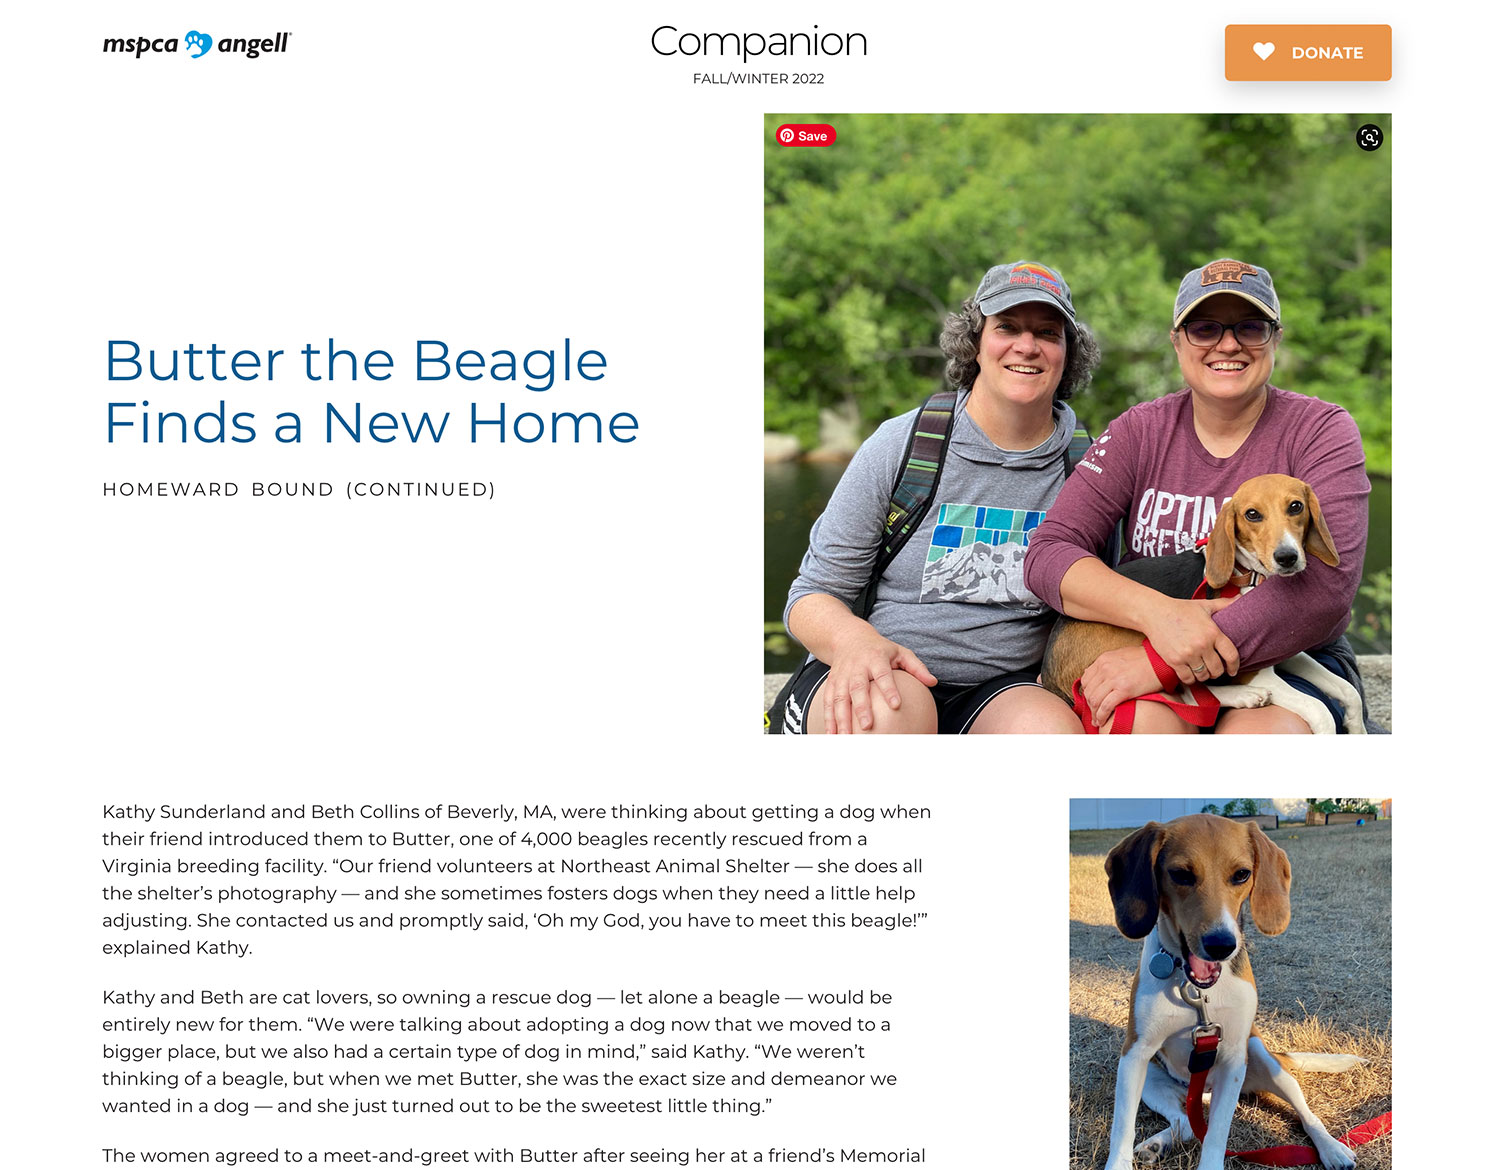 MSPCA-Angell newsletter website with family holding their beagle